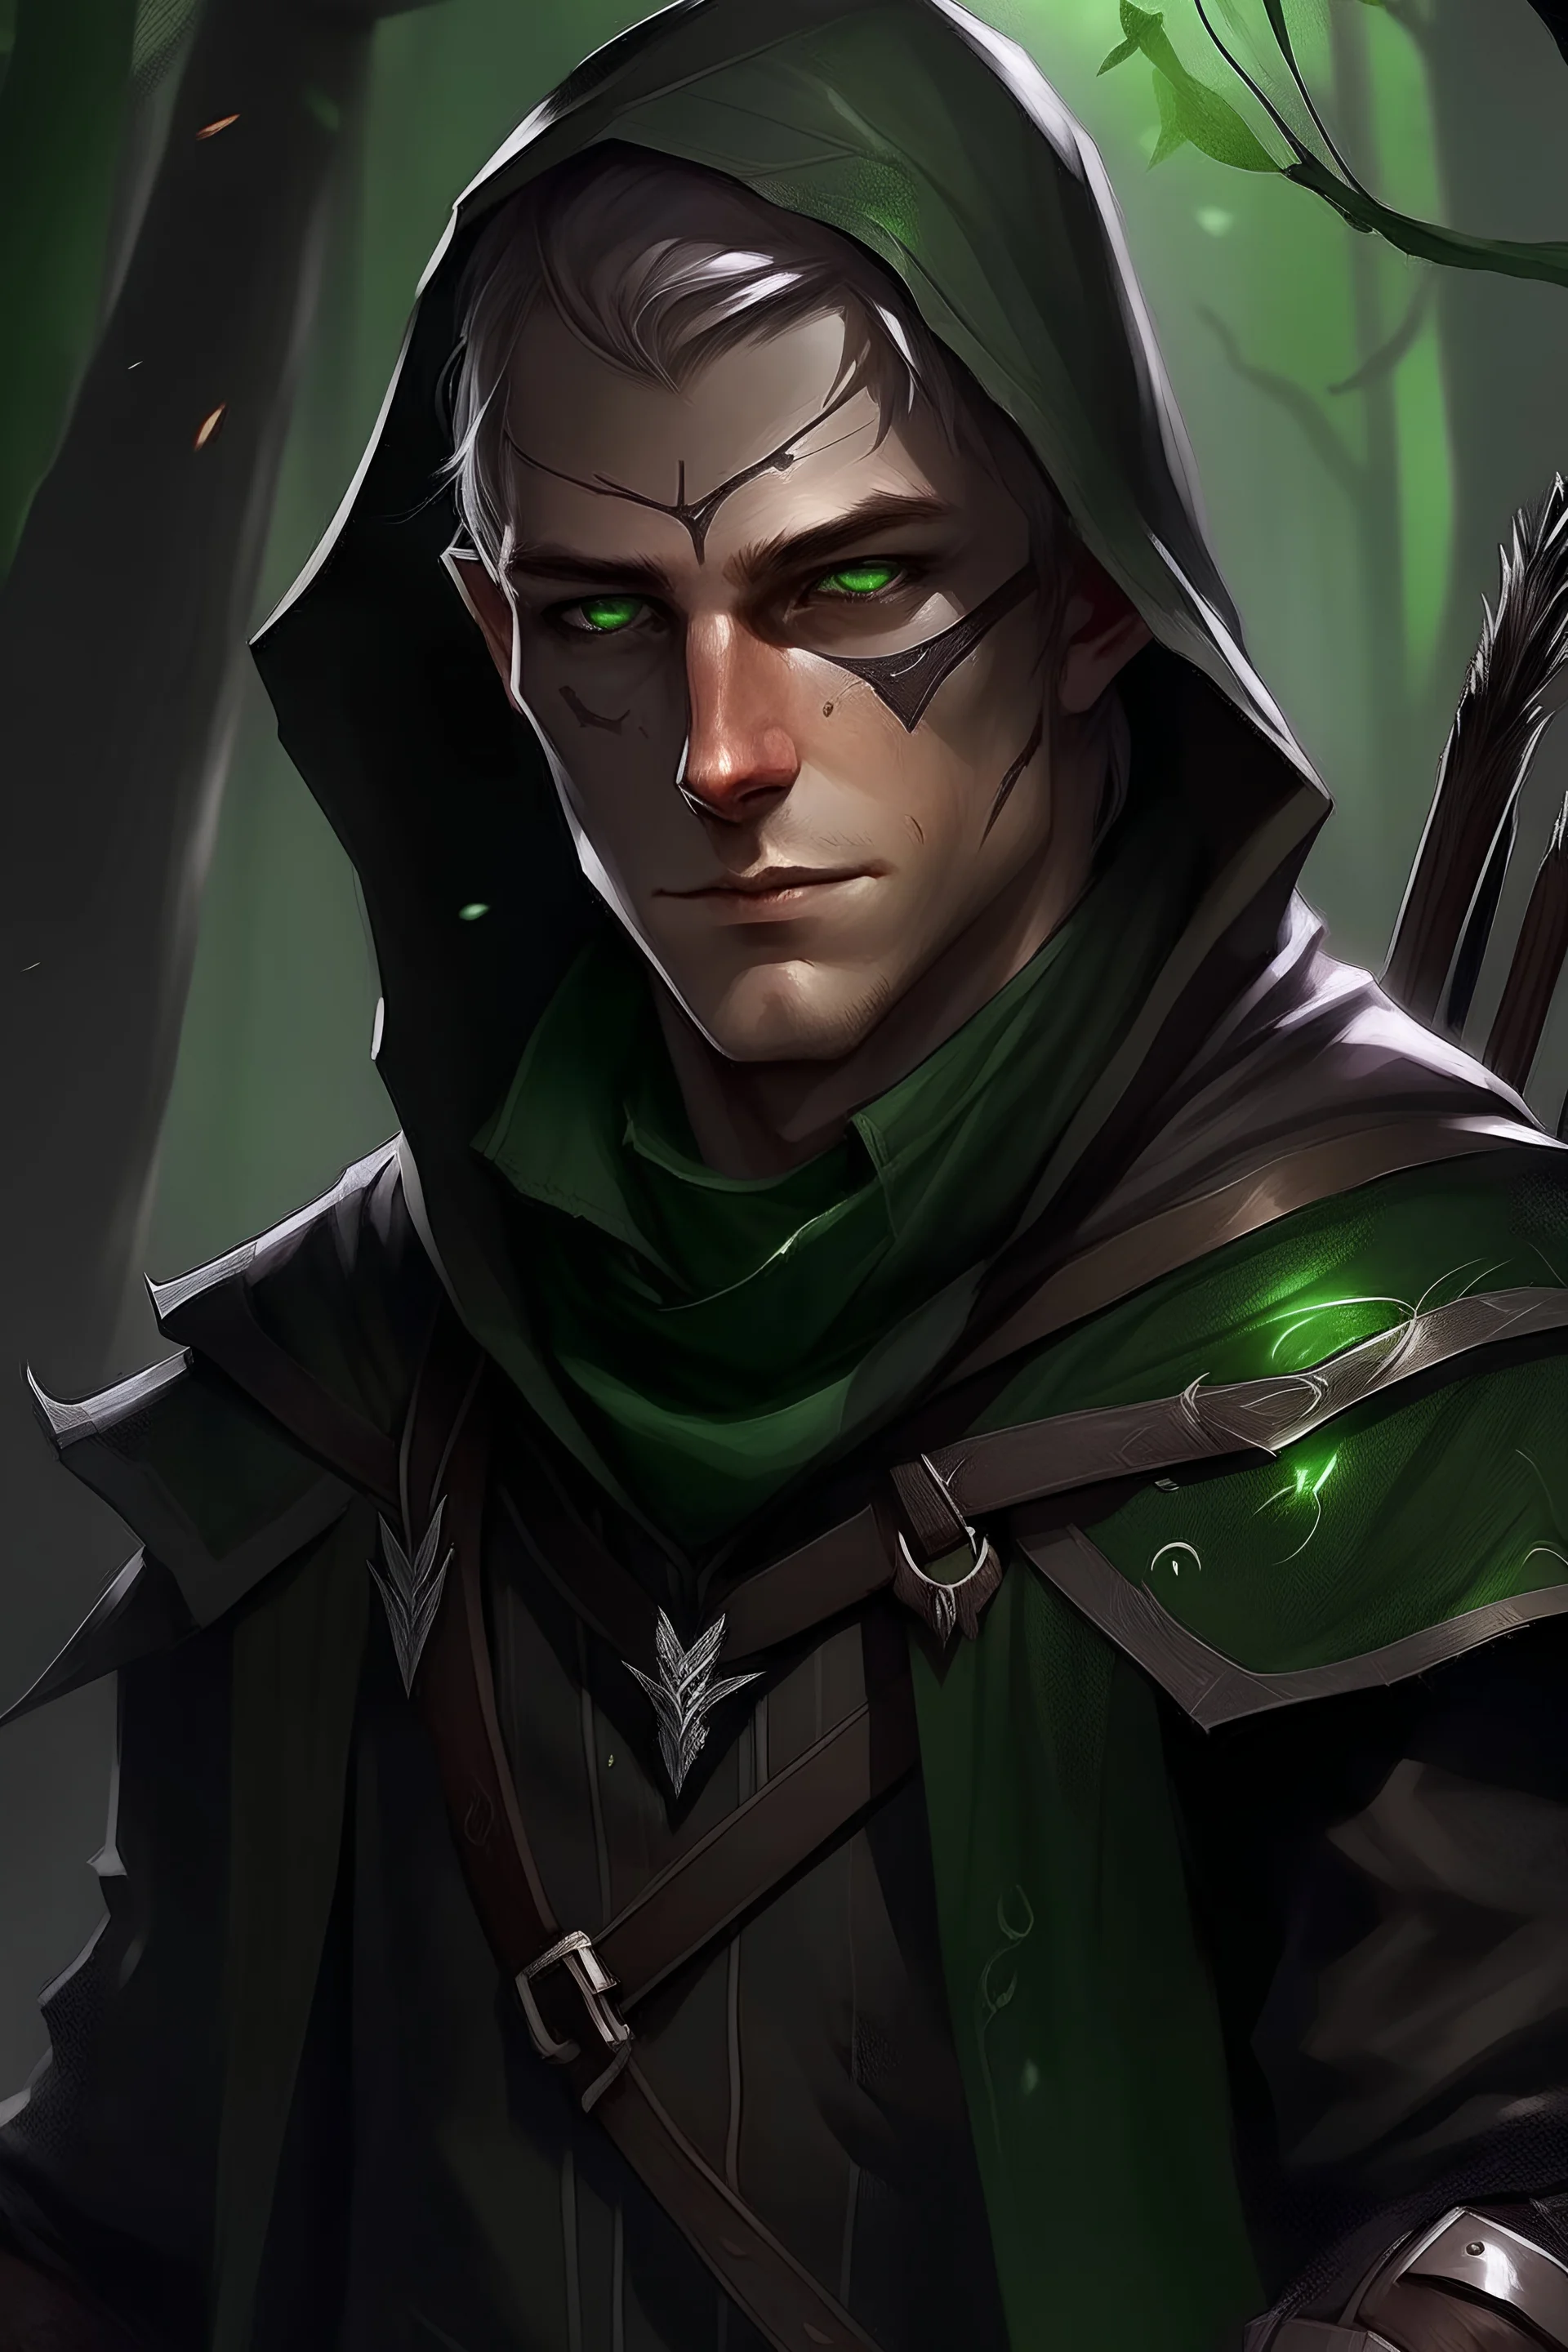 35 year old male dark rogue wood elf, thief assassin, Mauve hair, sparkling green eyes, glowing brown skin, black hood, black leather, messy, disheveled, trees, sneaky, bow and arrows, tall, skinny